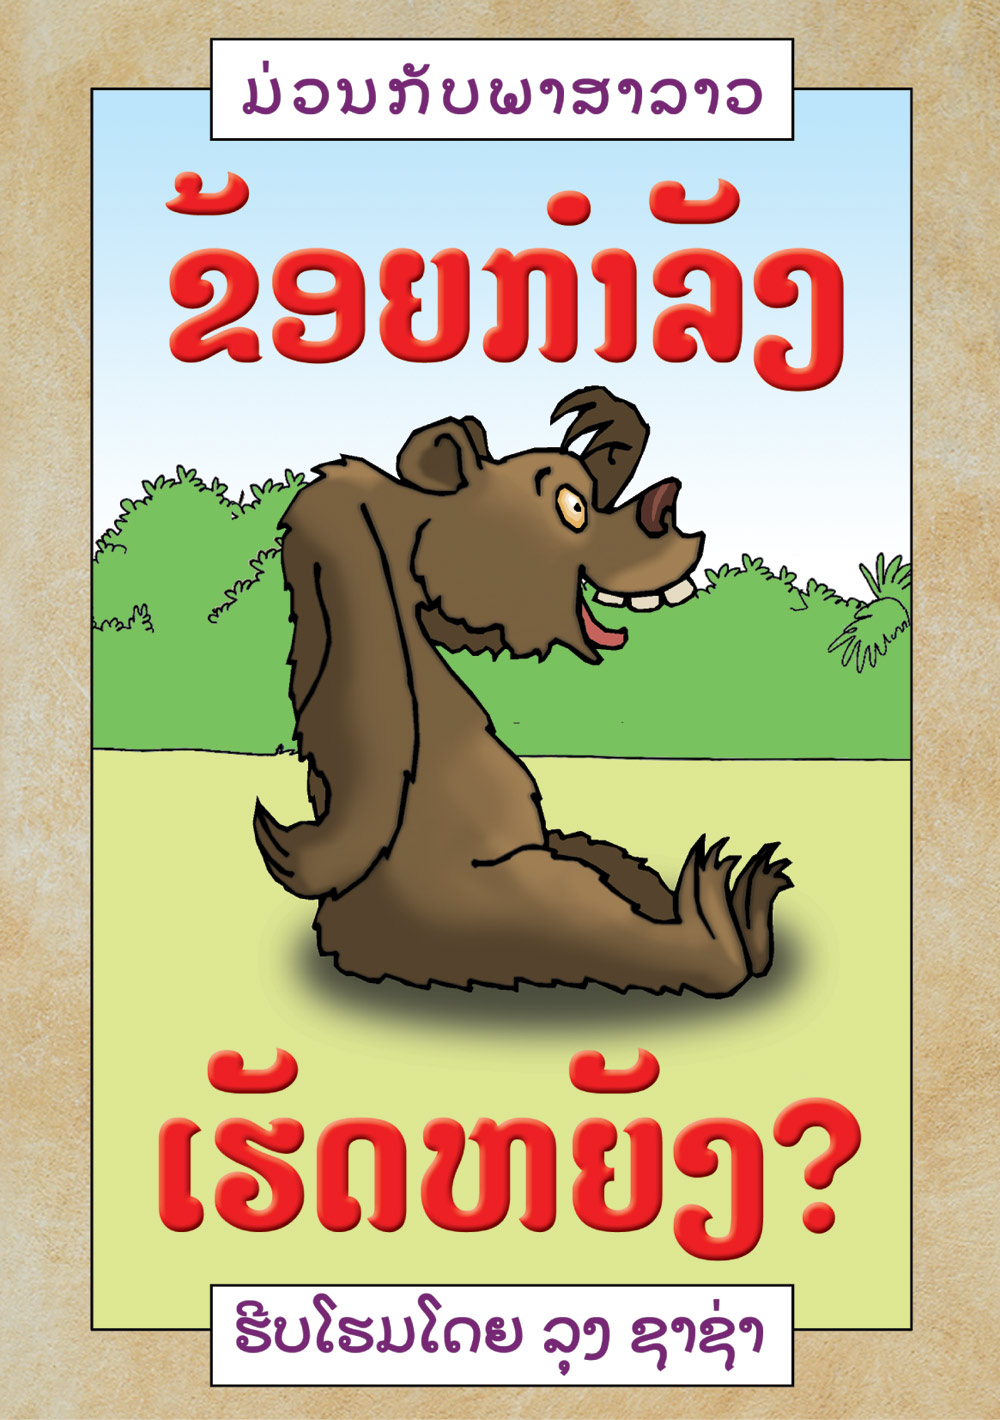 What Am I Doing? large book cover, published in Lao language